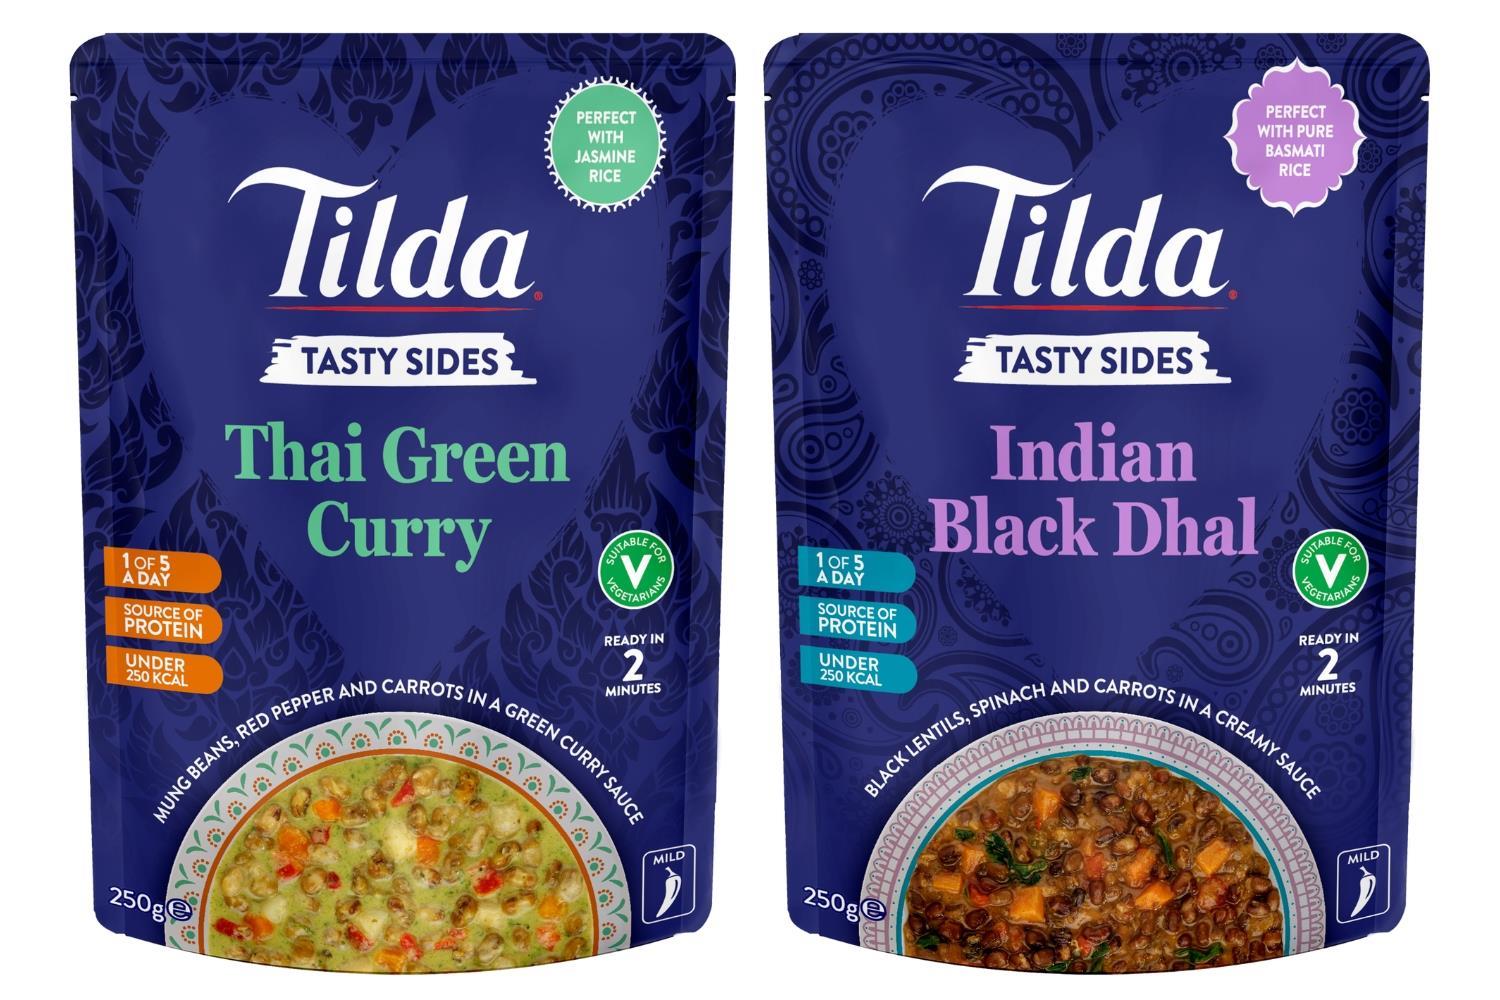 A Guide To Paprika - Taste, Uses & Substitutes - Tilda Rice UK